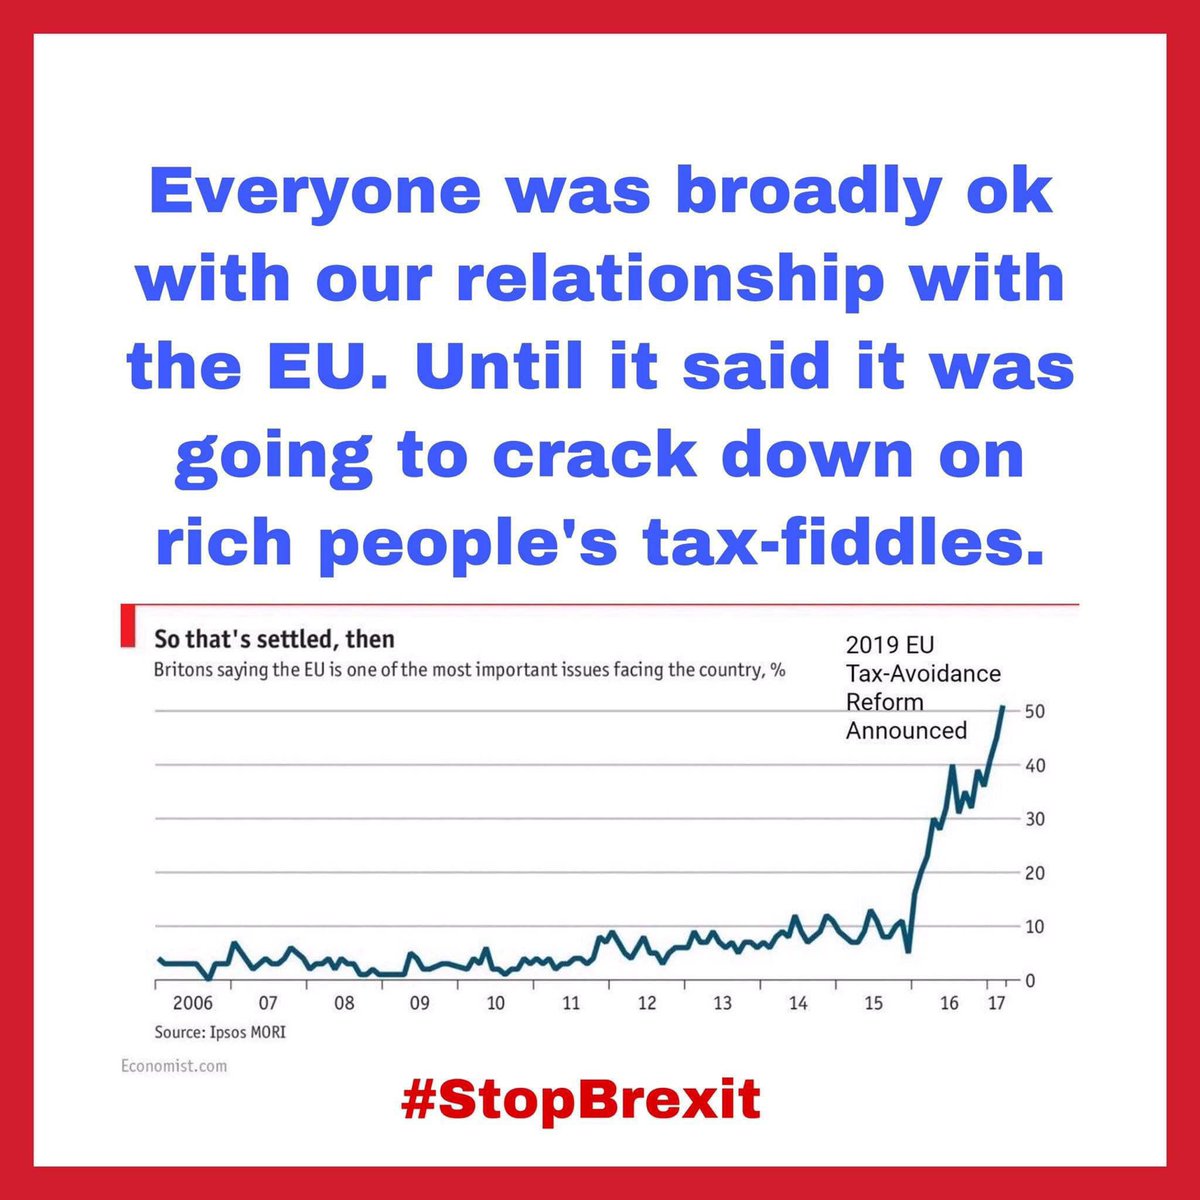 Brexit was all so filthy rich tax dodging #tory rats like you could keep dodging #tax because the EU wanted to clamp down on tax evasion so don't insult us with #brexitlies and twaddle.